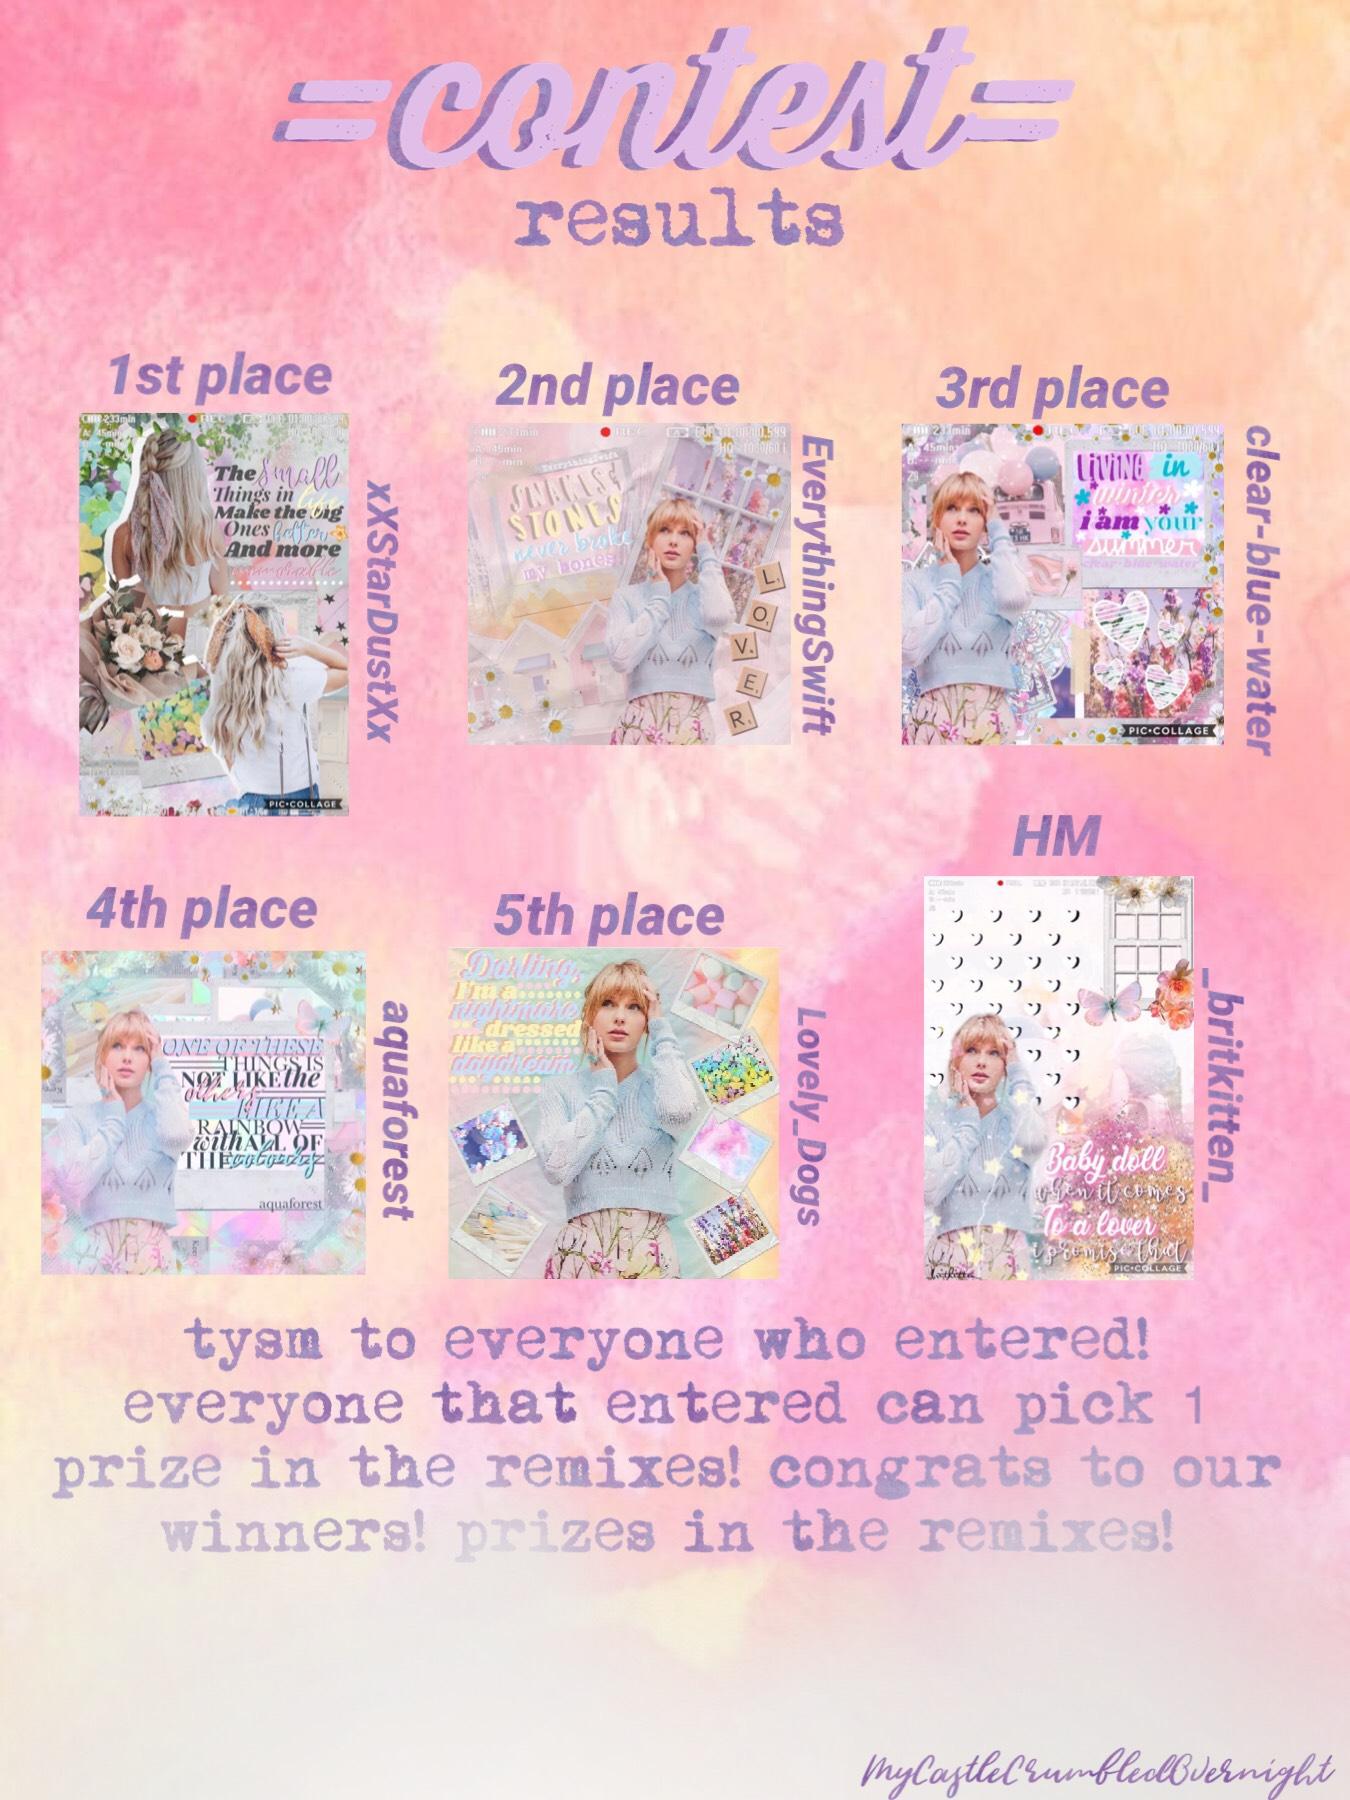 congrats to all our winners! prizes in the remixes! tap!
shoutout to xXStarDustXx for getting 1st place! go follow her! her collages are absolutely stunning! 